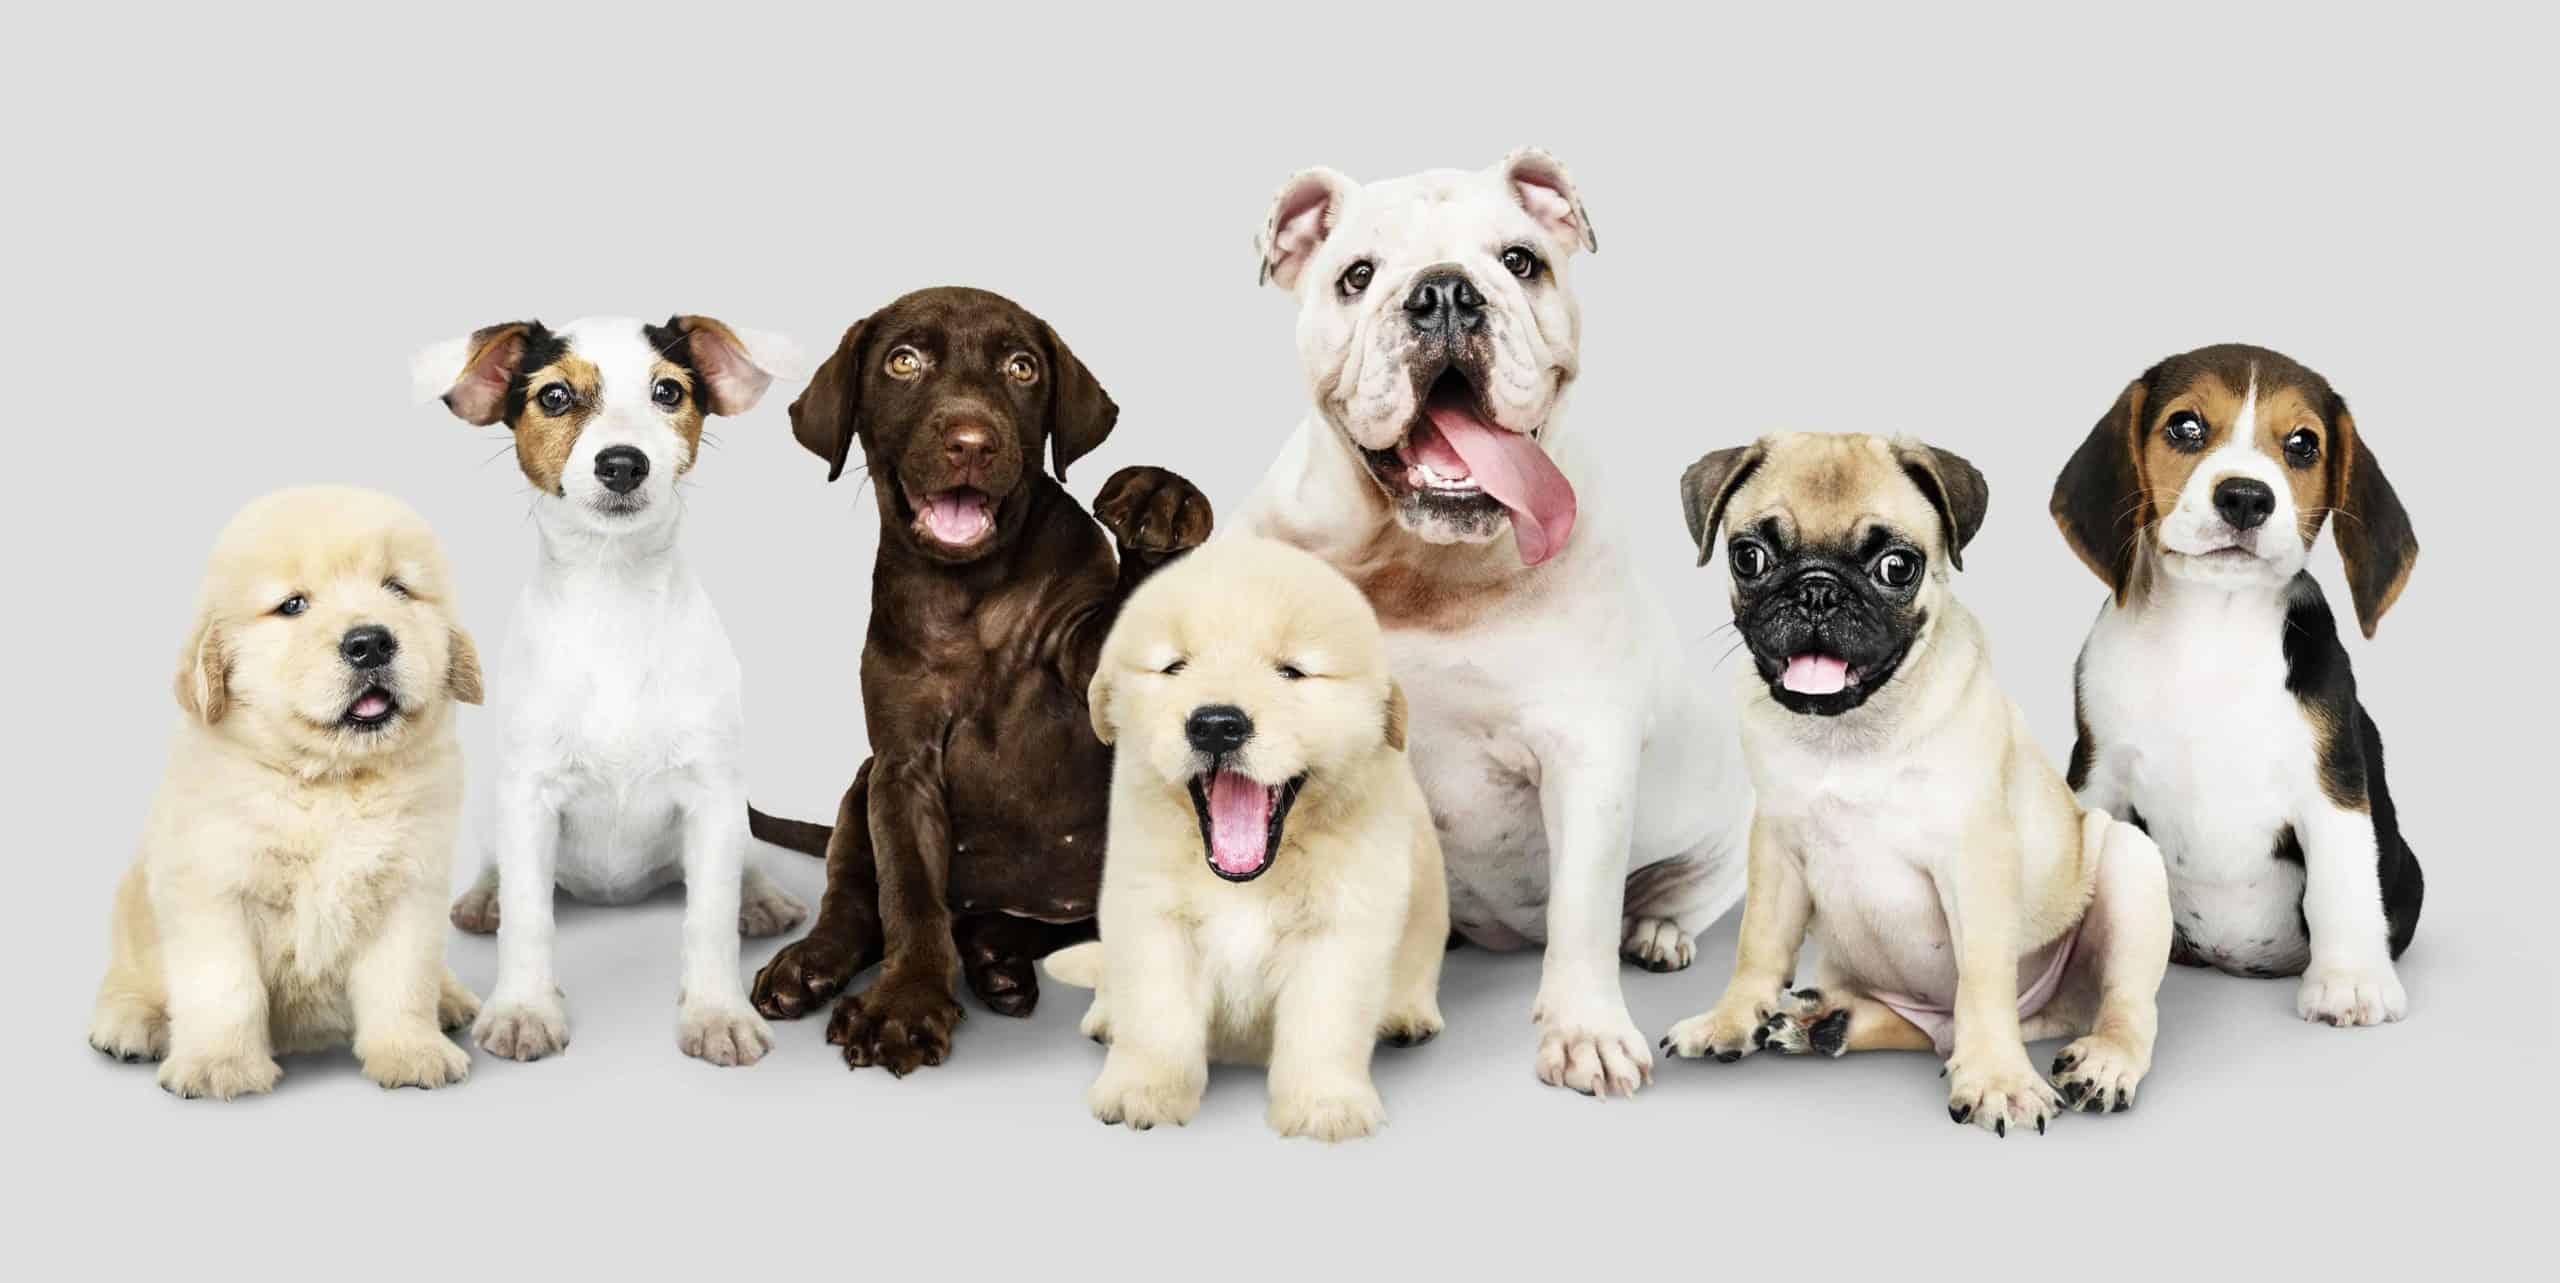 Collection of adorable puppies including Golden and Labrador retrievers, Jack Russell Terrier, Bulldog, Pug and Beagle. Bringing home a puppy is a big responsibility. Use these first-week puppy tips to establish a strong, healthy relationship with your puppy.